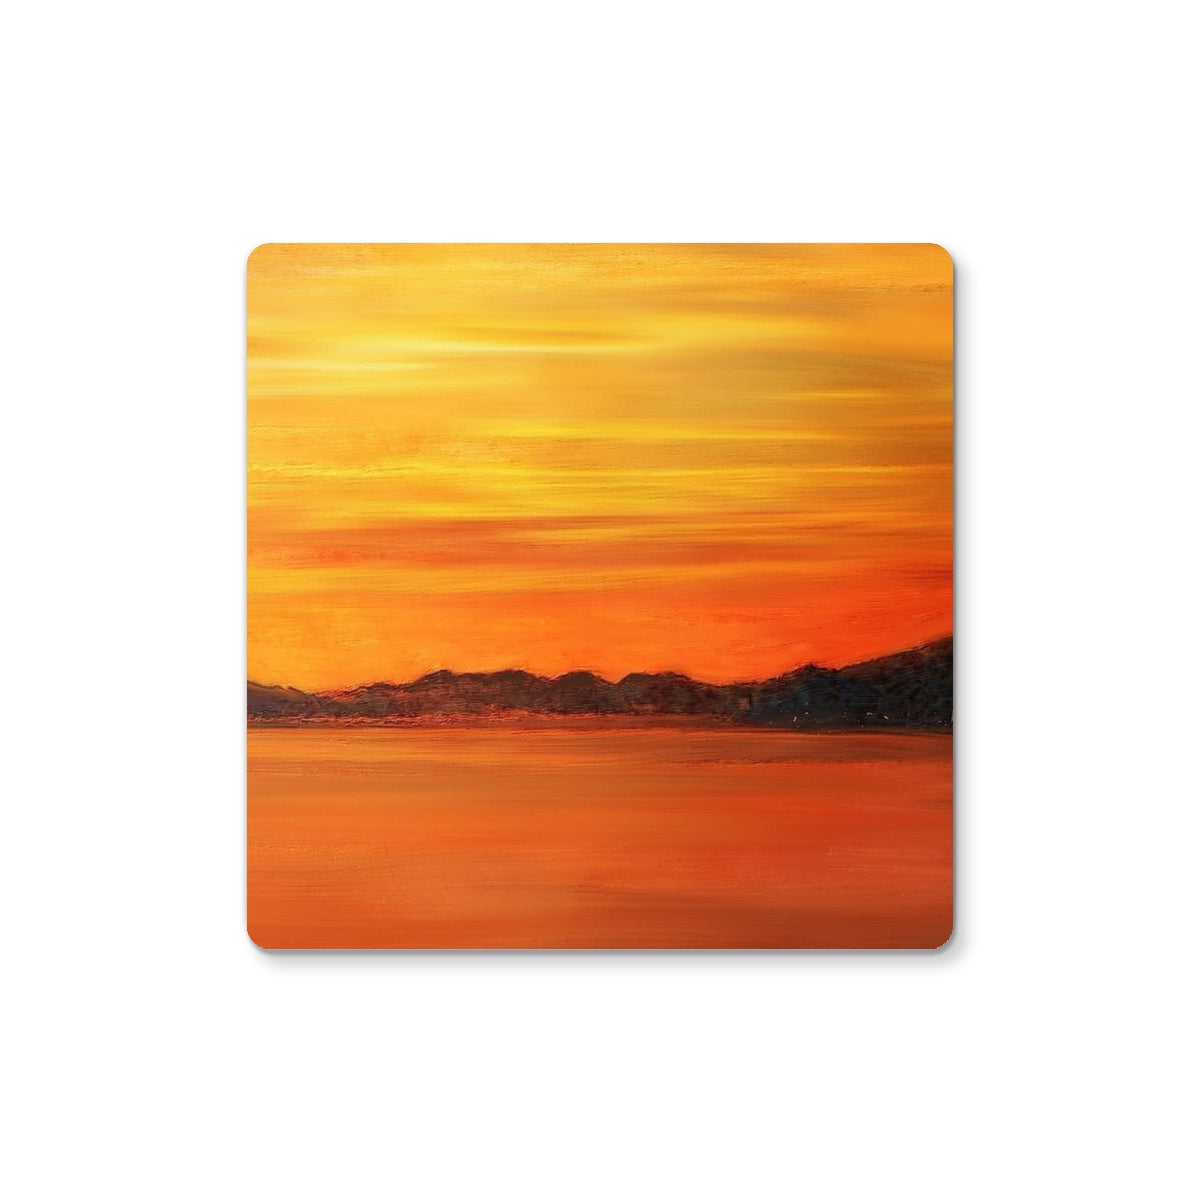 Loch Fyne Sunset Art Gifts Coaster-Coasters-Scottish Lochs & Mountains Art Gallery-Single Coaster-Paintings, Prints, Homeware, Art Gifts From Scotland By Scottish Artist Kevin Hunter